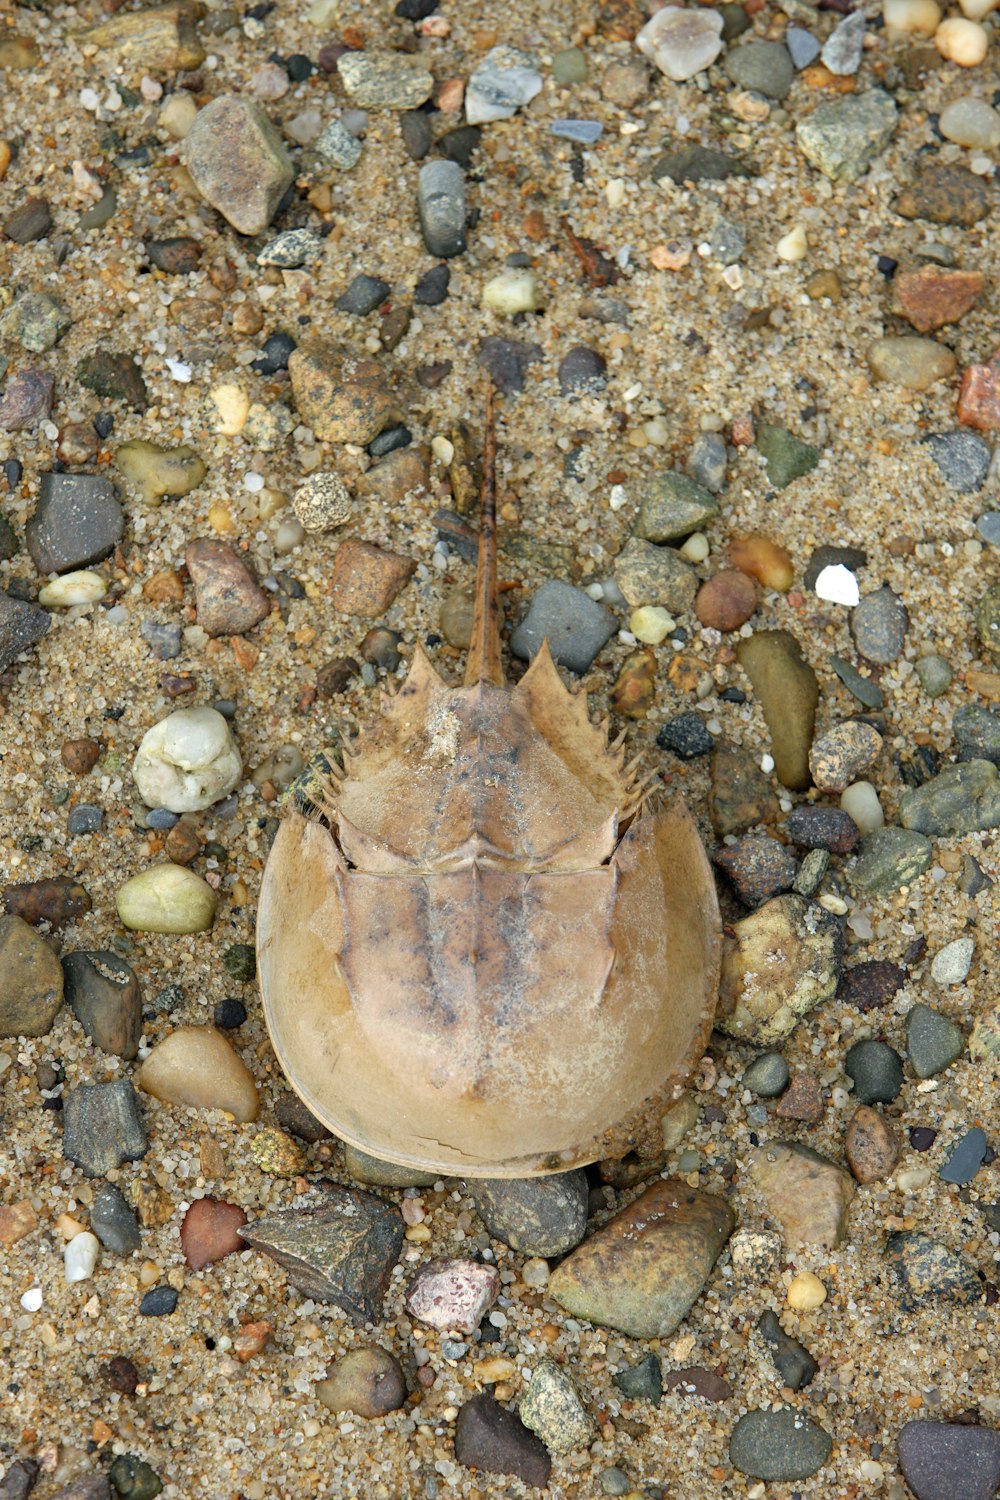 a dead bird on the ground surrounded by rocks and gravel